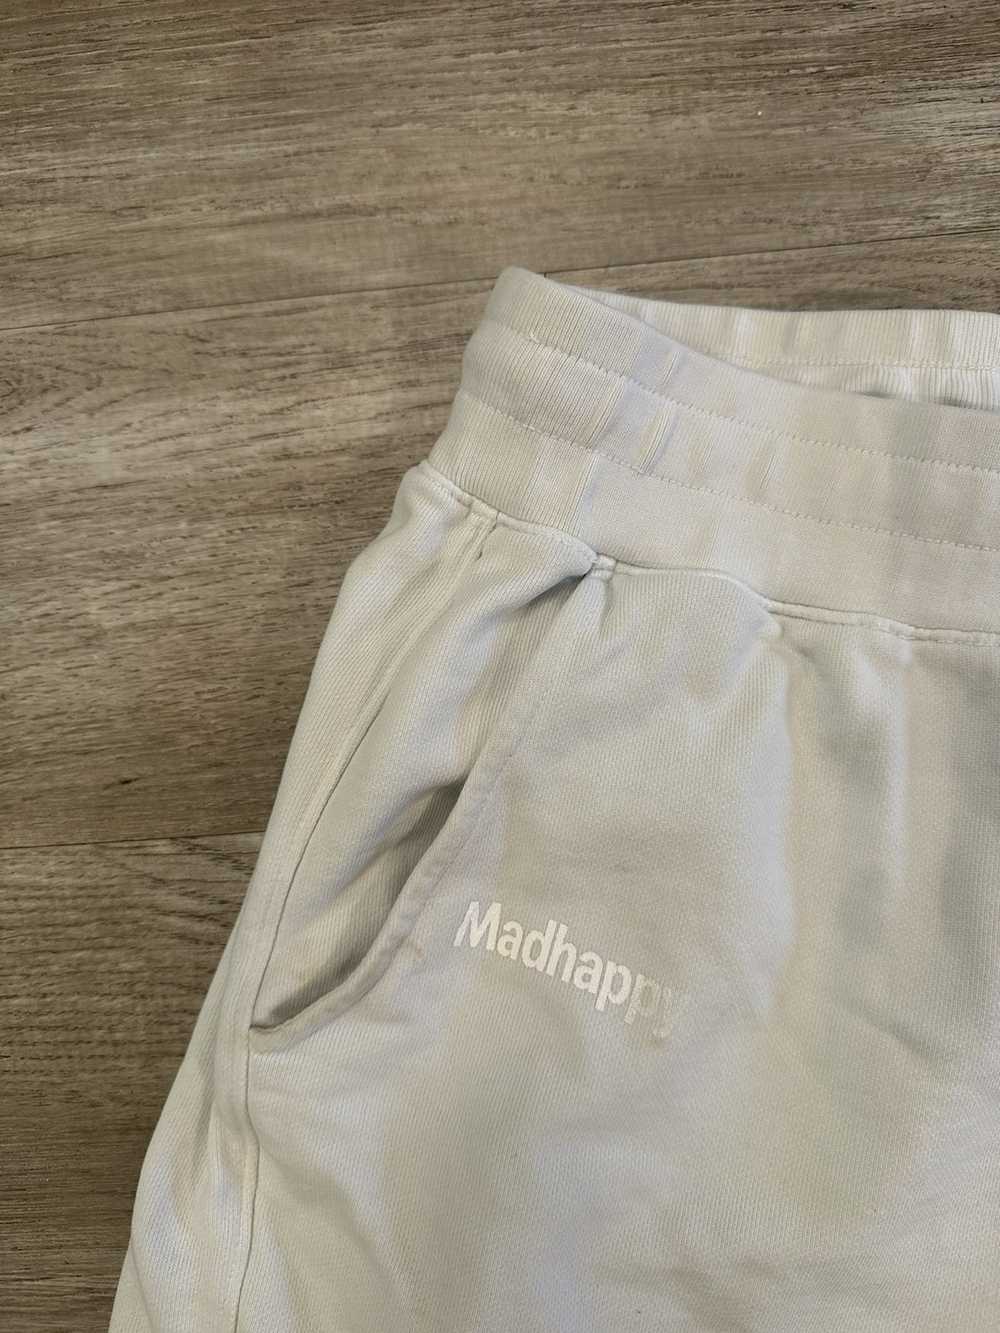 Madhappy Madhappy Peace Shorts Size L - image 3